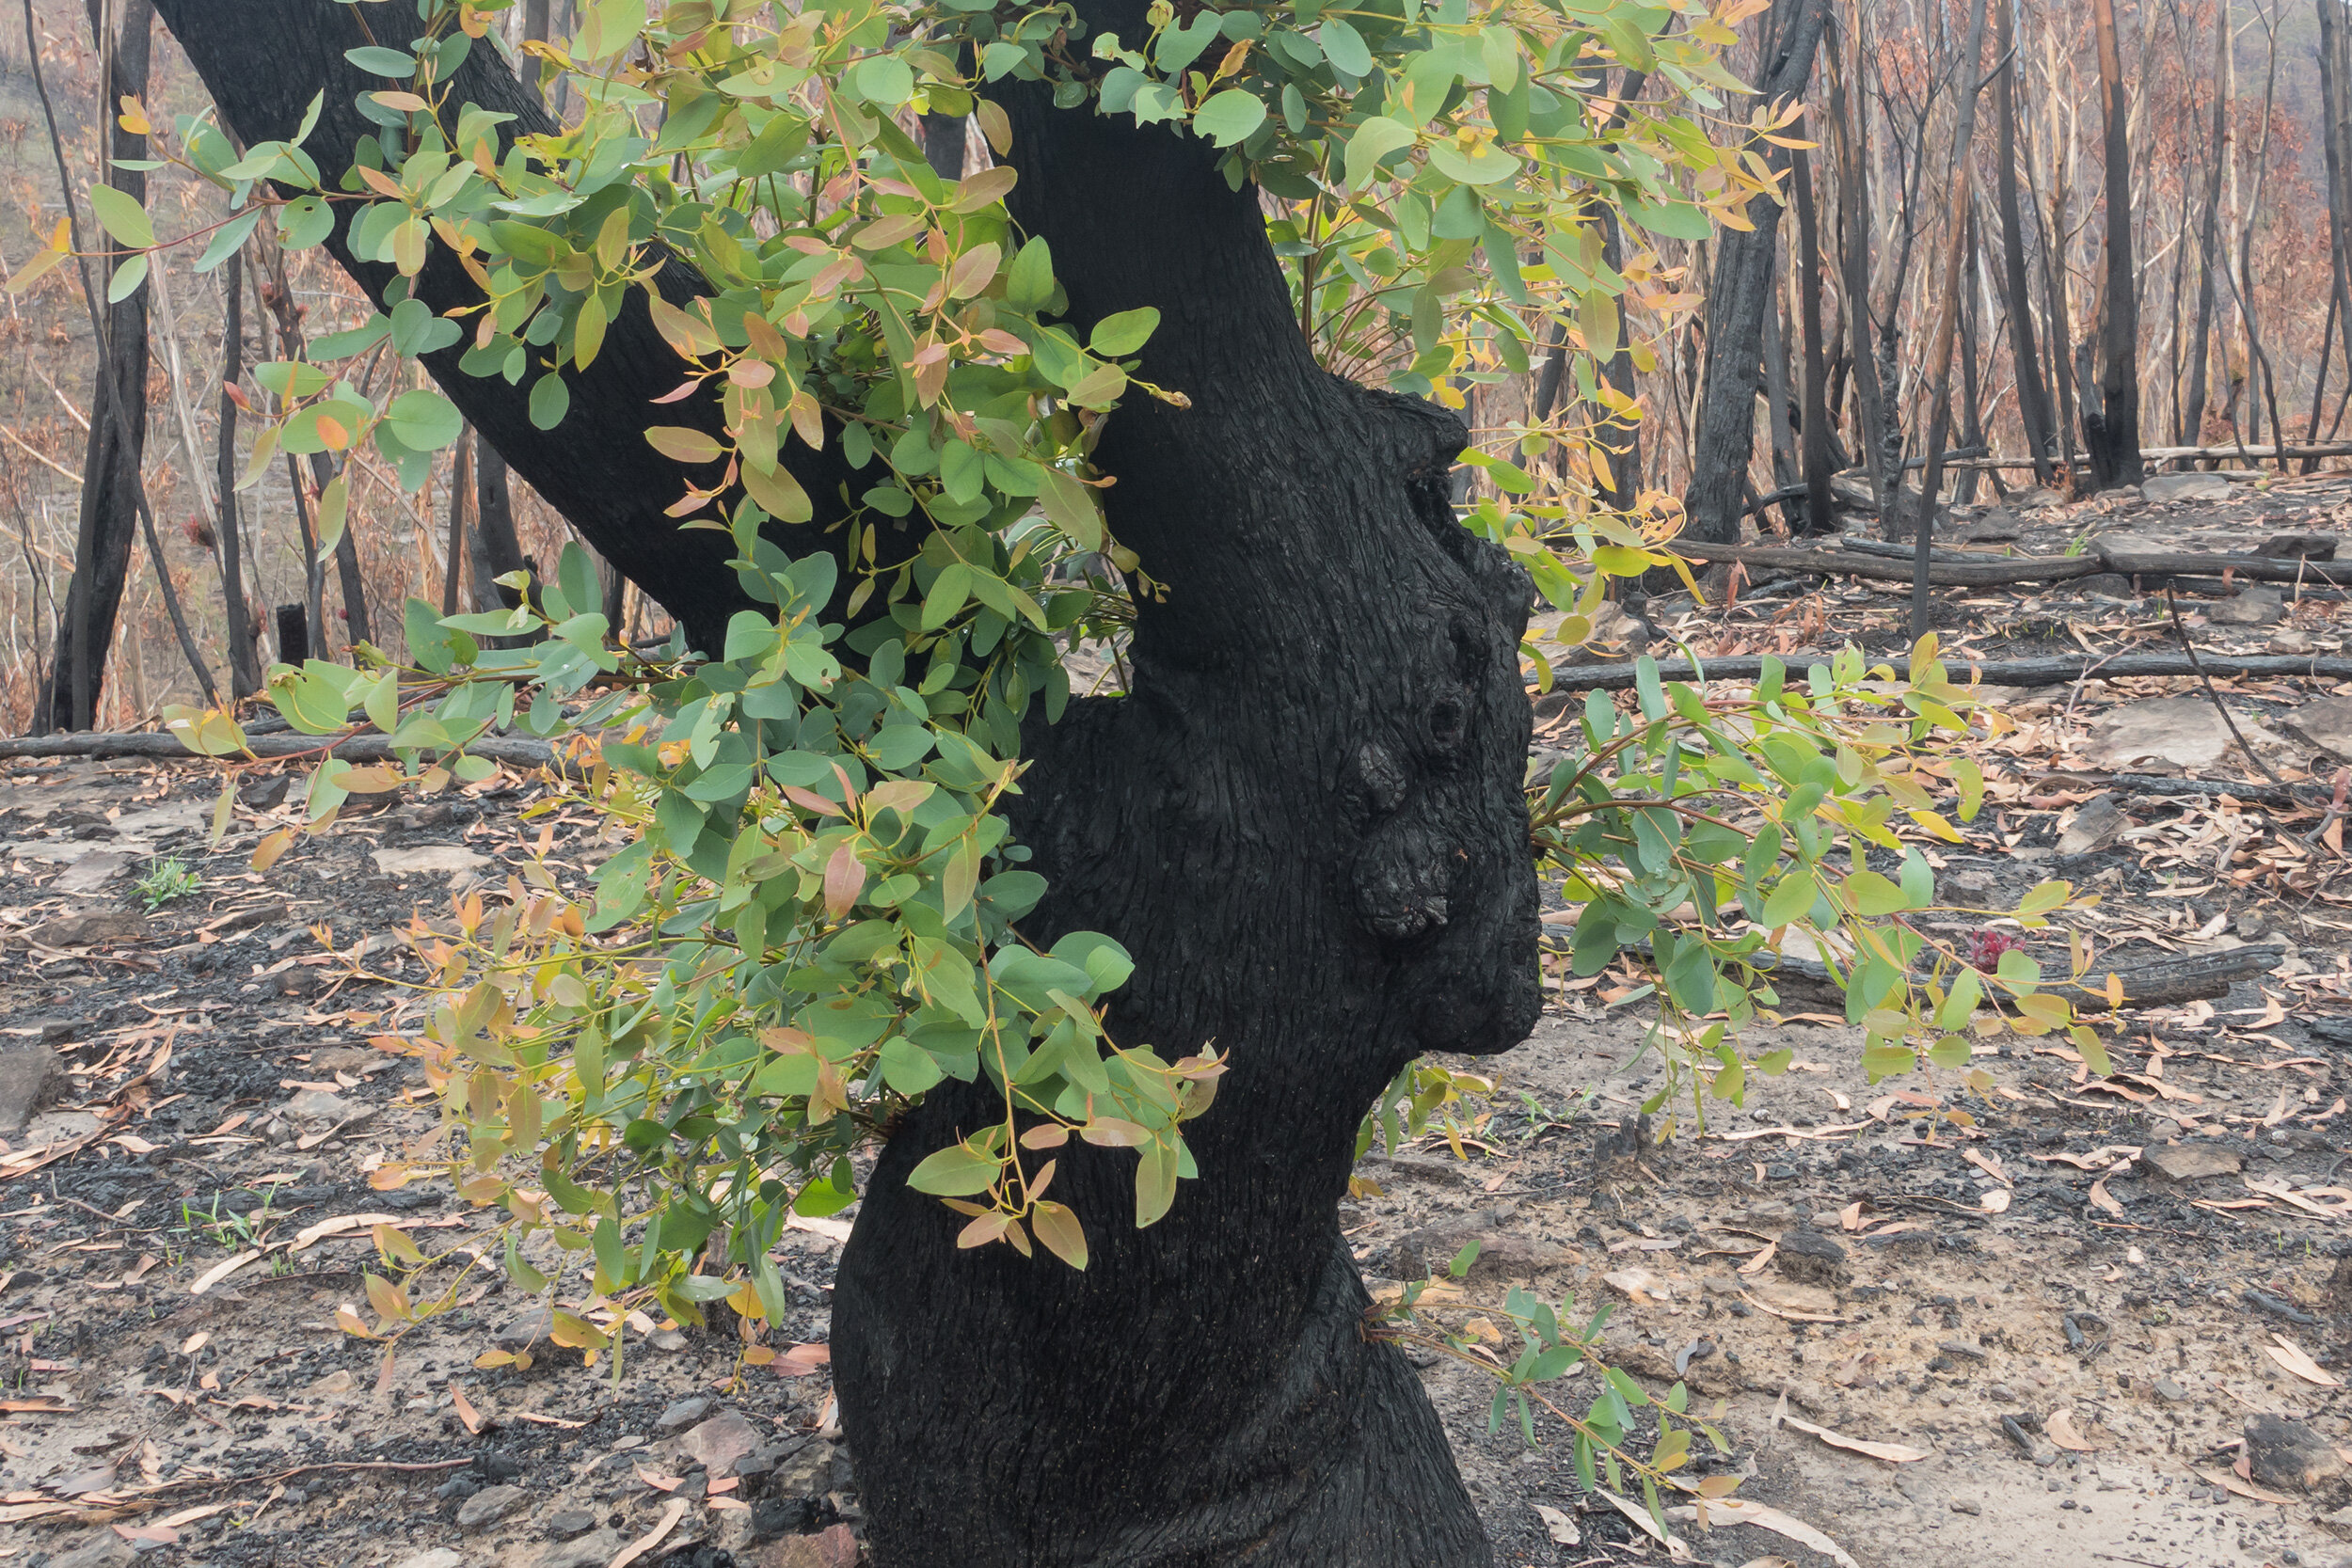 Sun 16 Feb 2020, Pierces Pass, Blue Mountains National Park, agony and ecstasy of nature after fire.